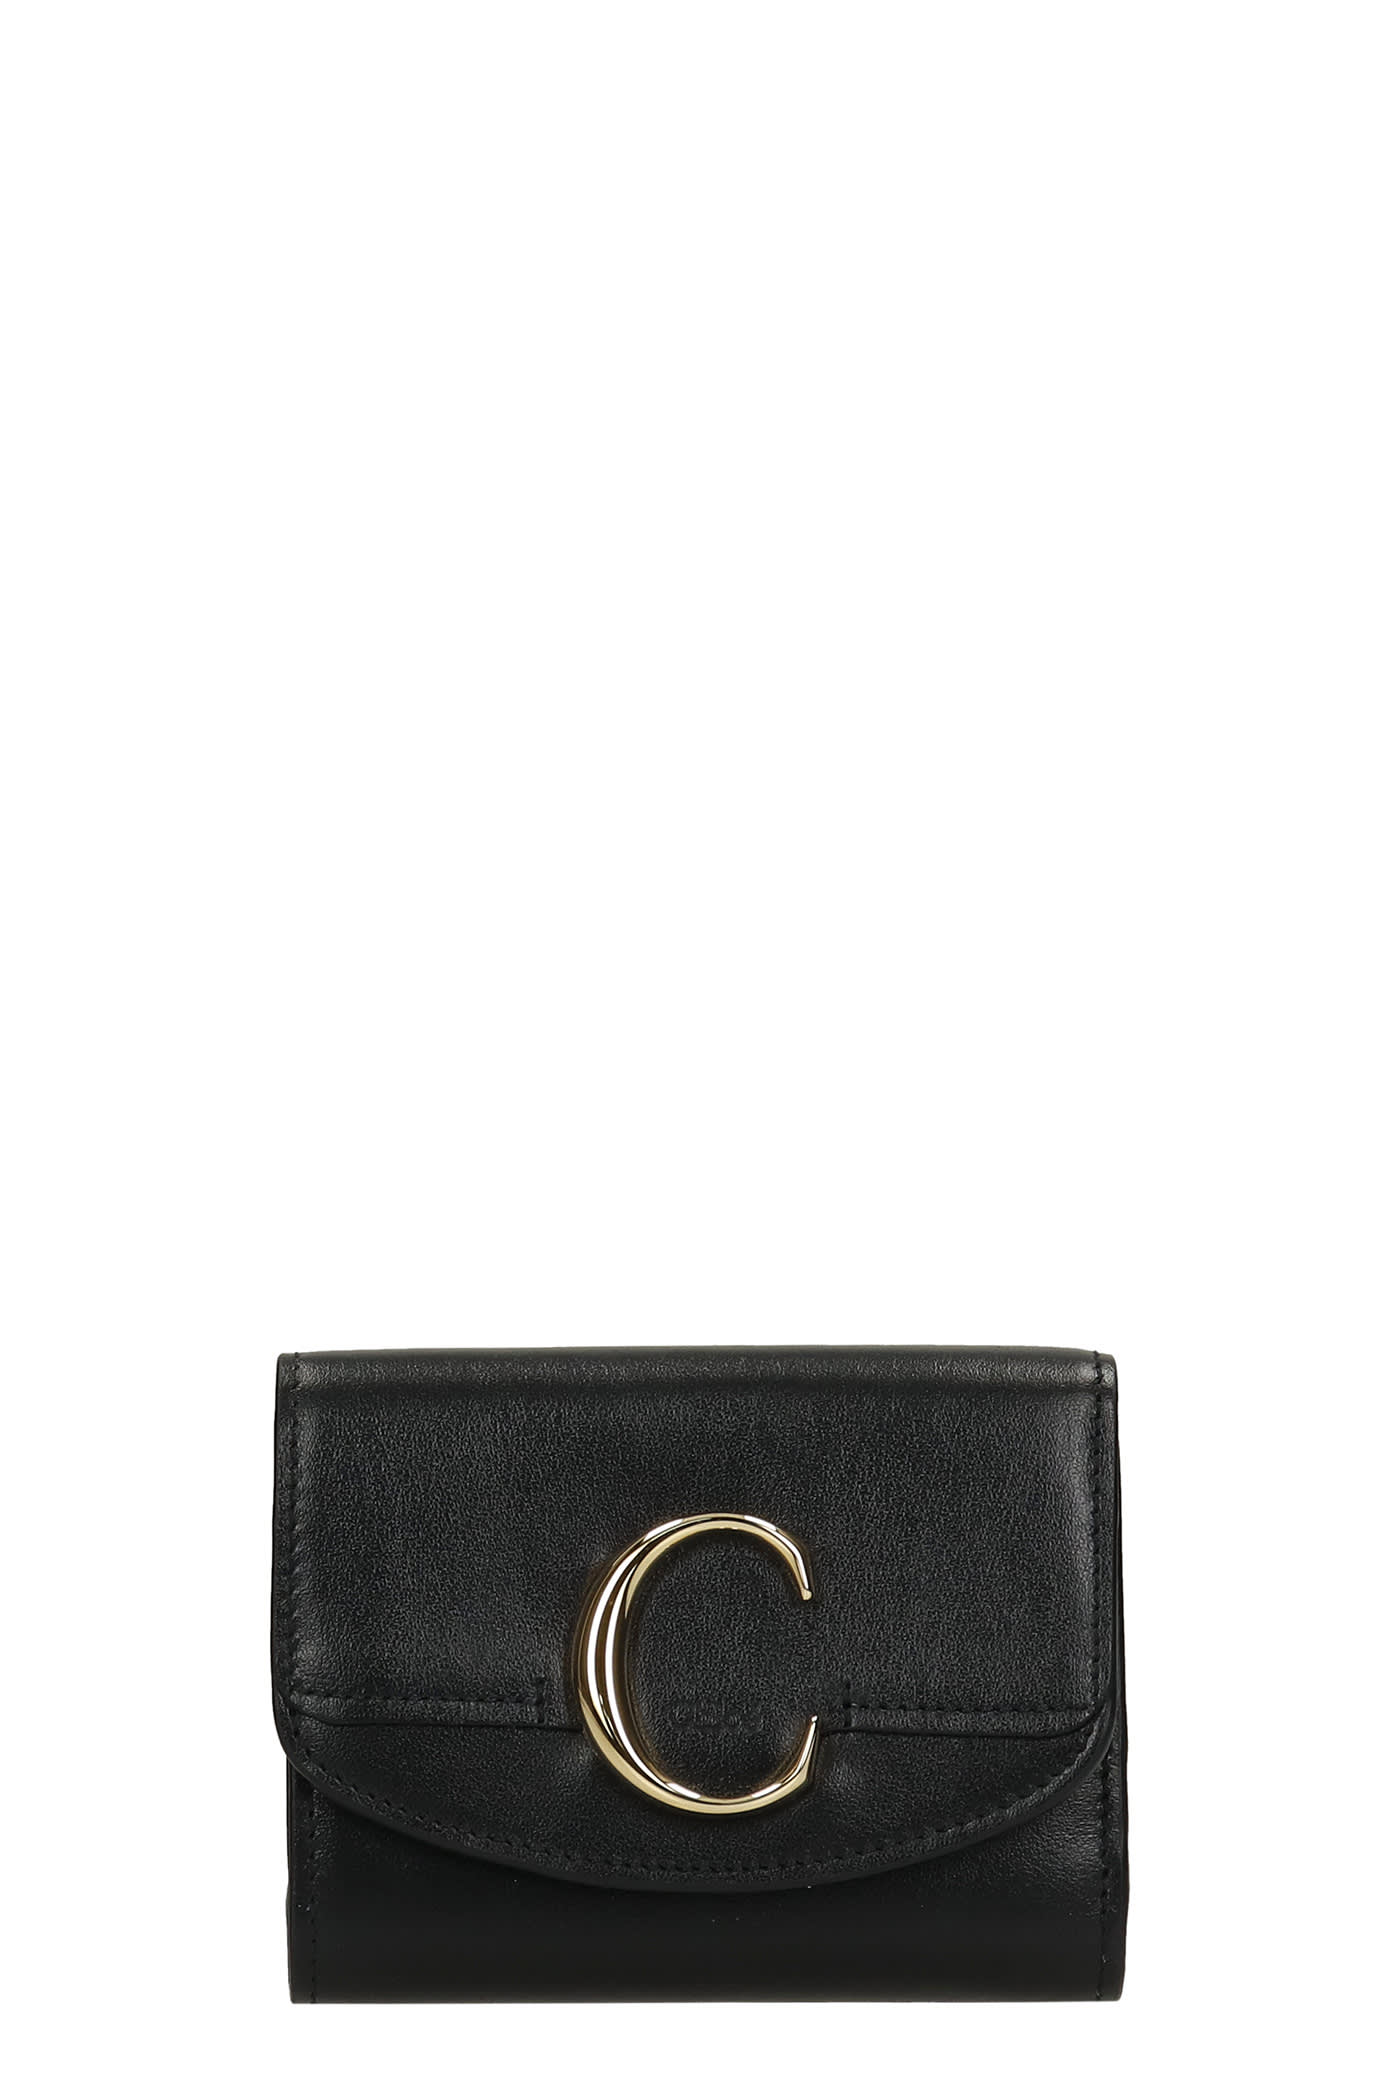 Chloé Wallet In Black Leather